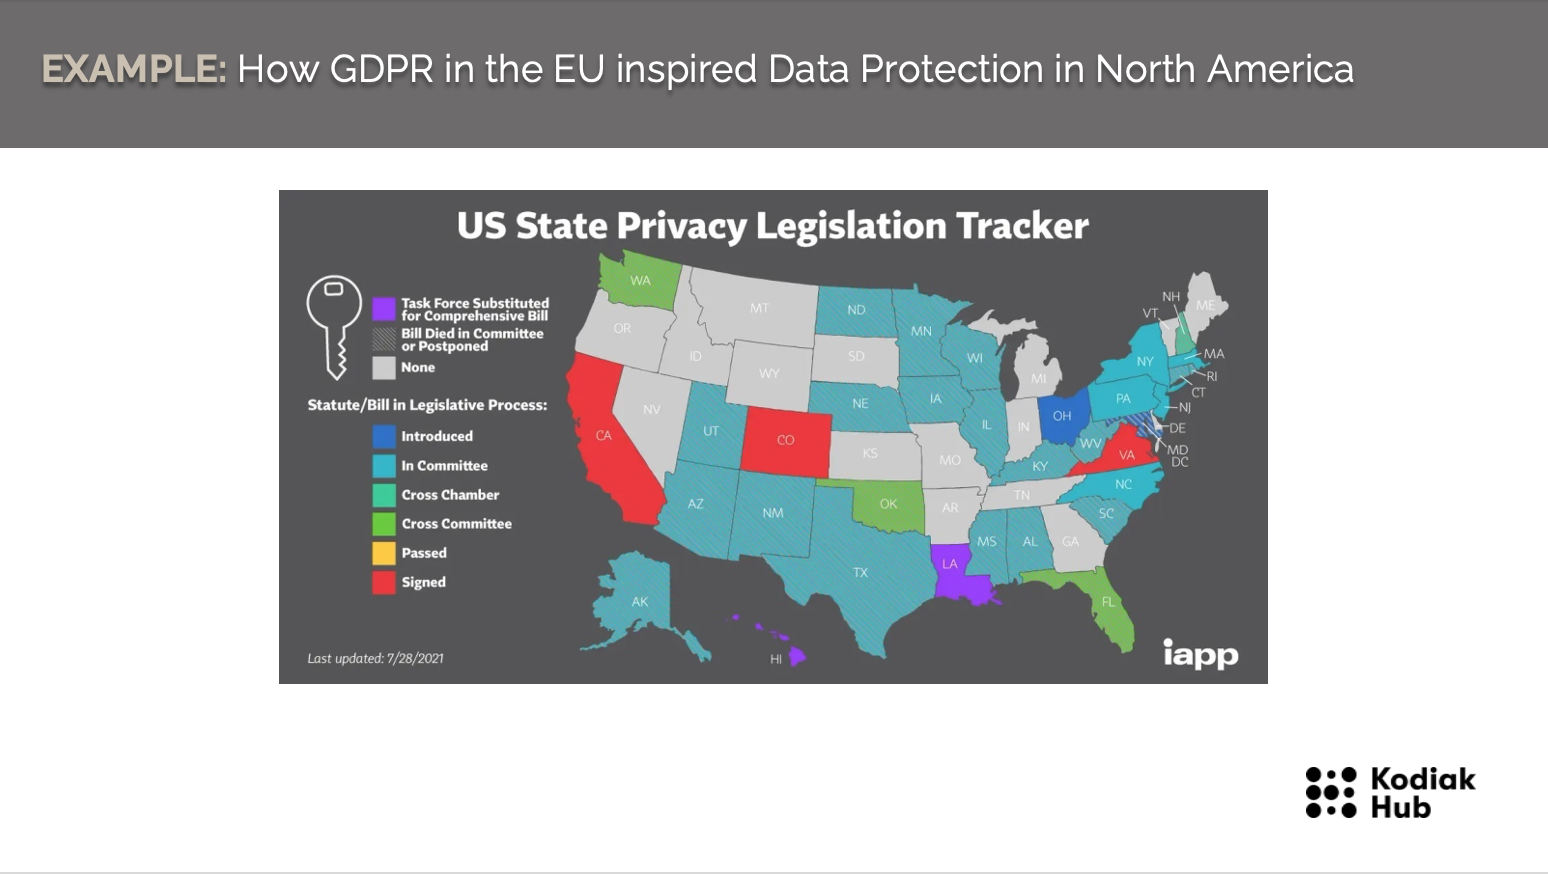 How GDPR Inspired Data Protection in North America